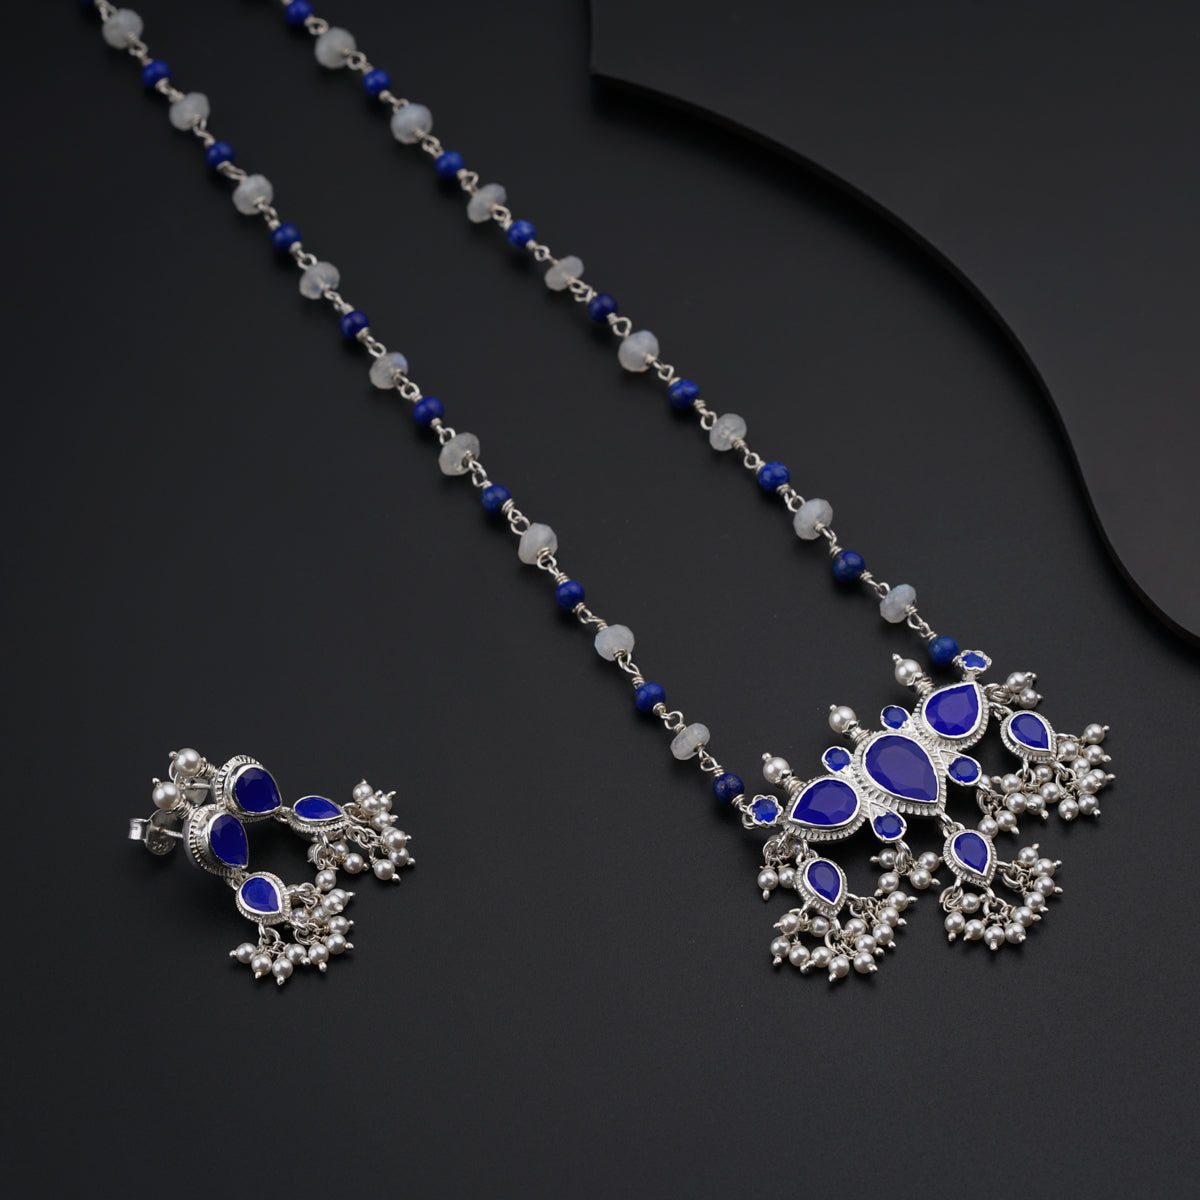 a necklace and earring set with blue stones